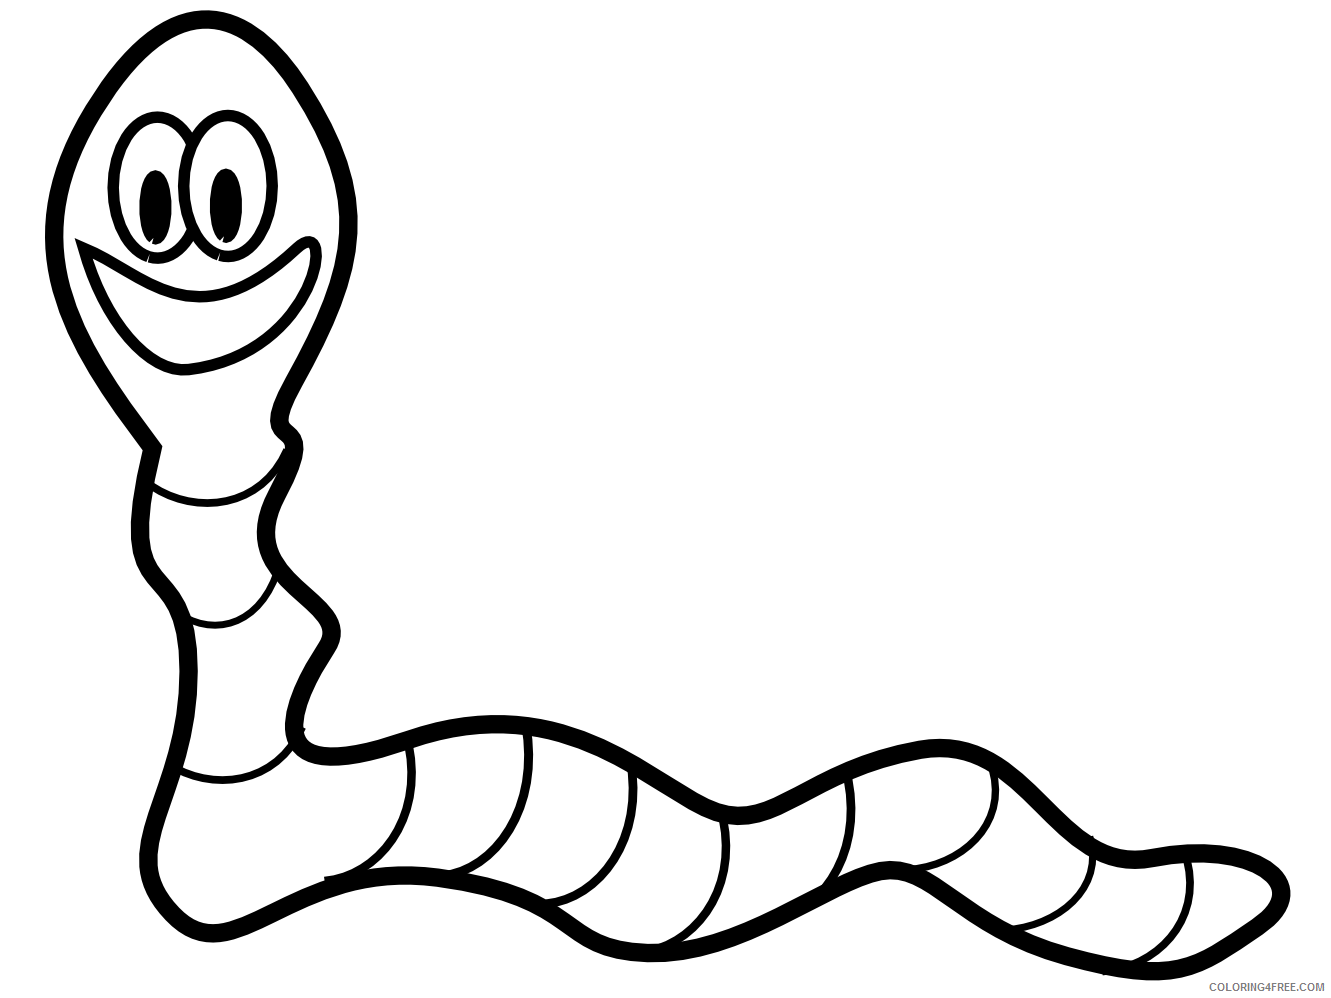 Worm Outline Coloring Pages 15 Worm Free Printable Coloring4free Coloring4free Com